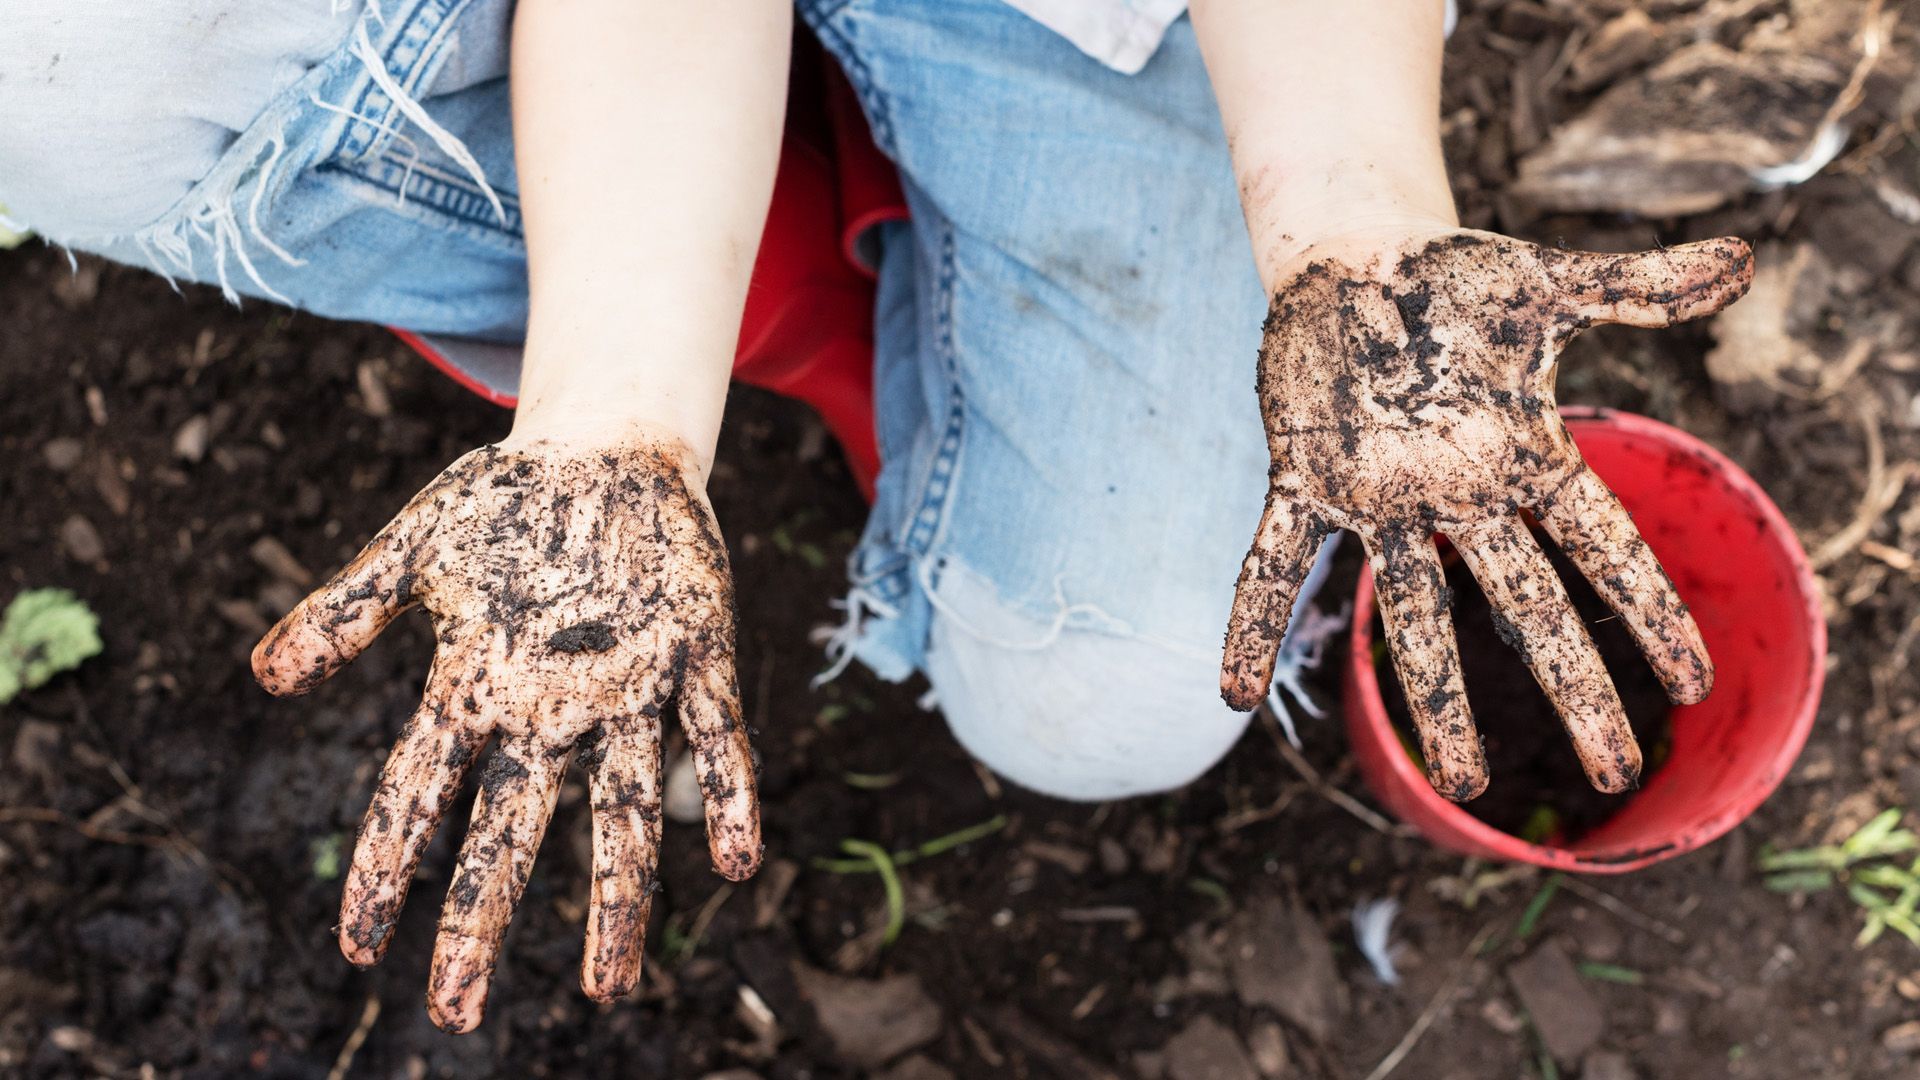 It's so easy to get dirty hands clean after gardening